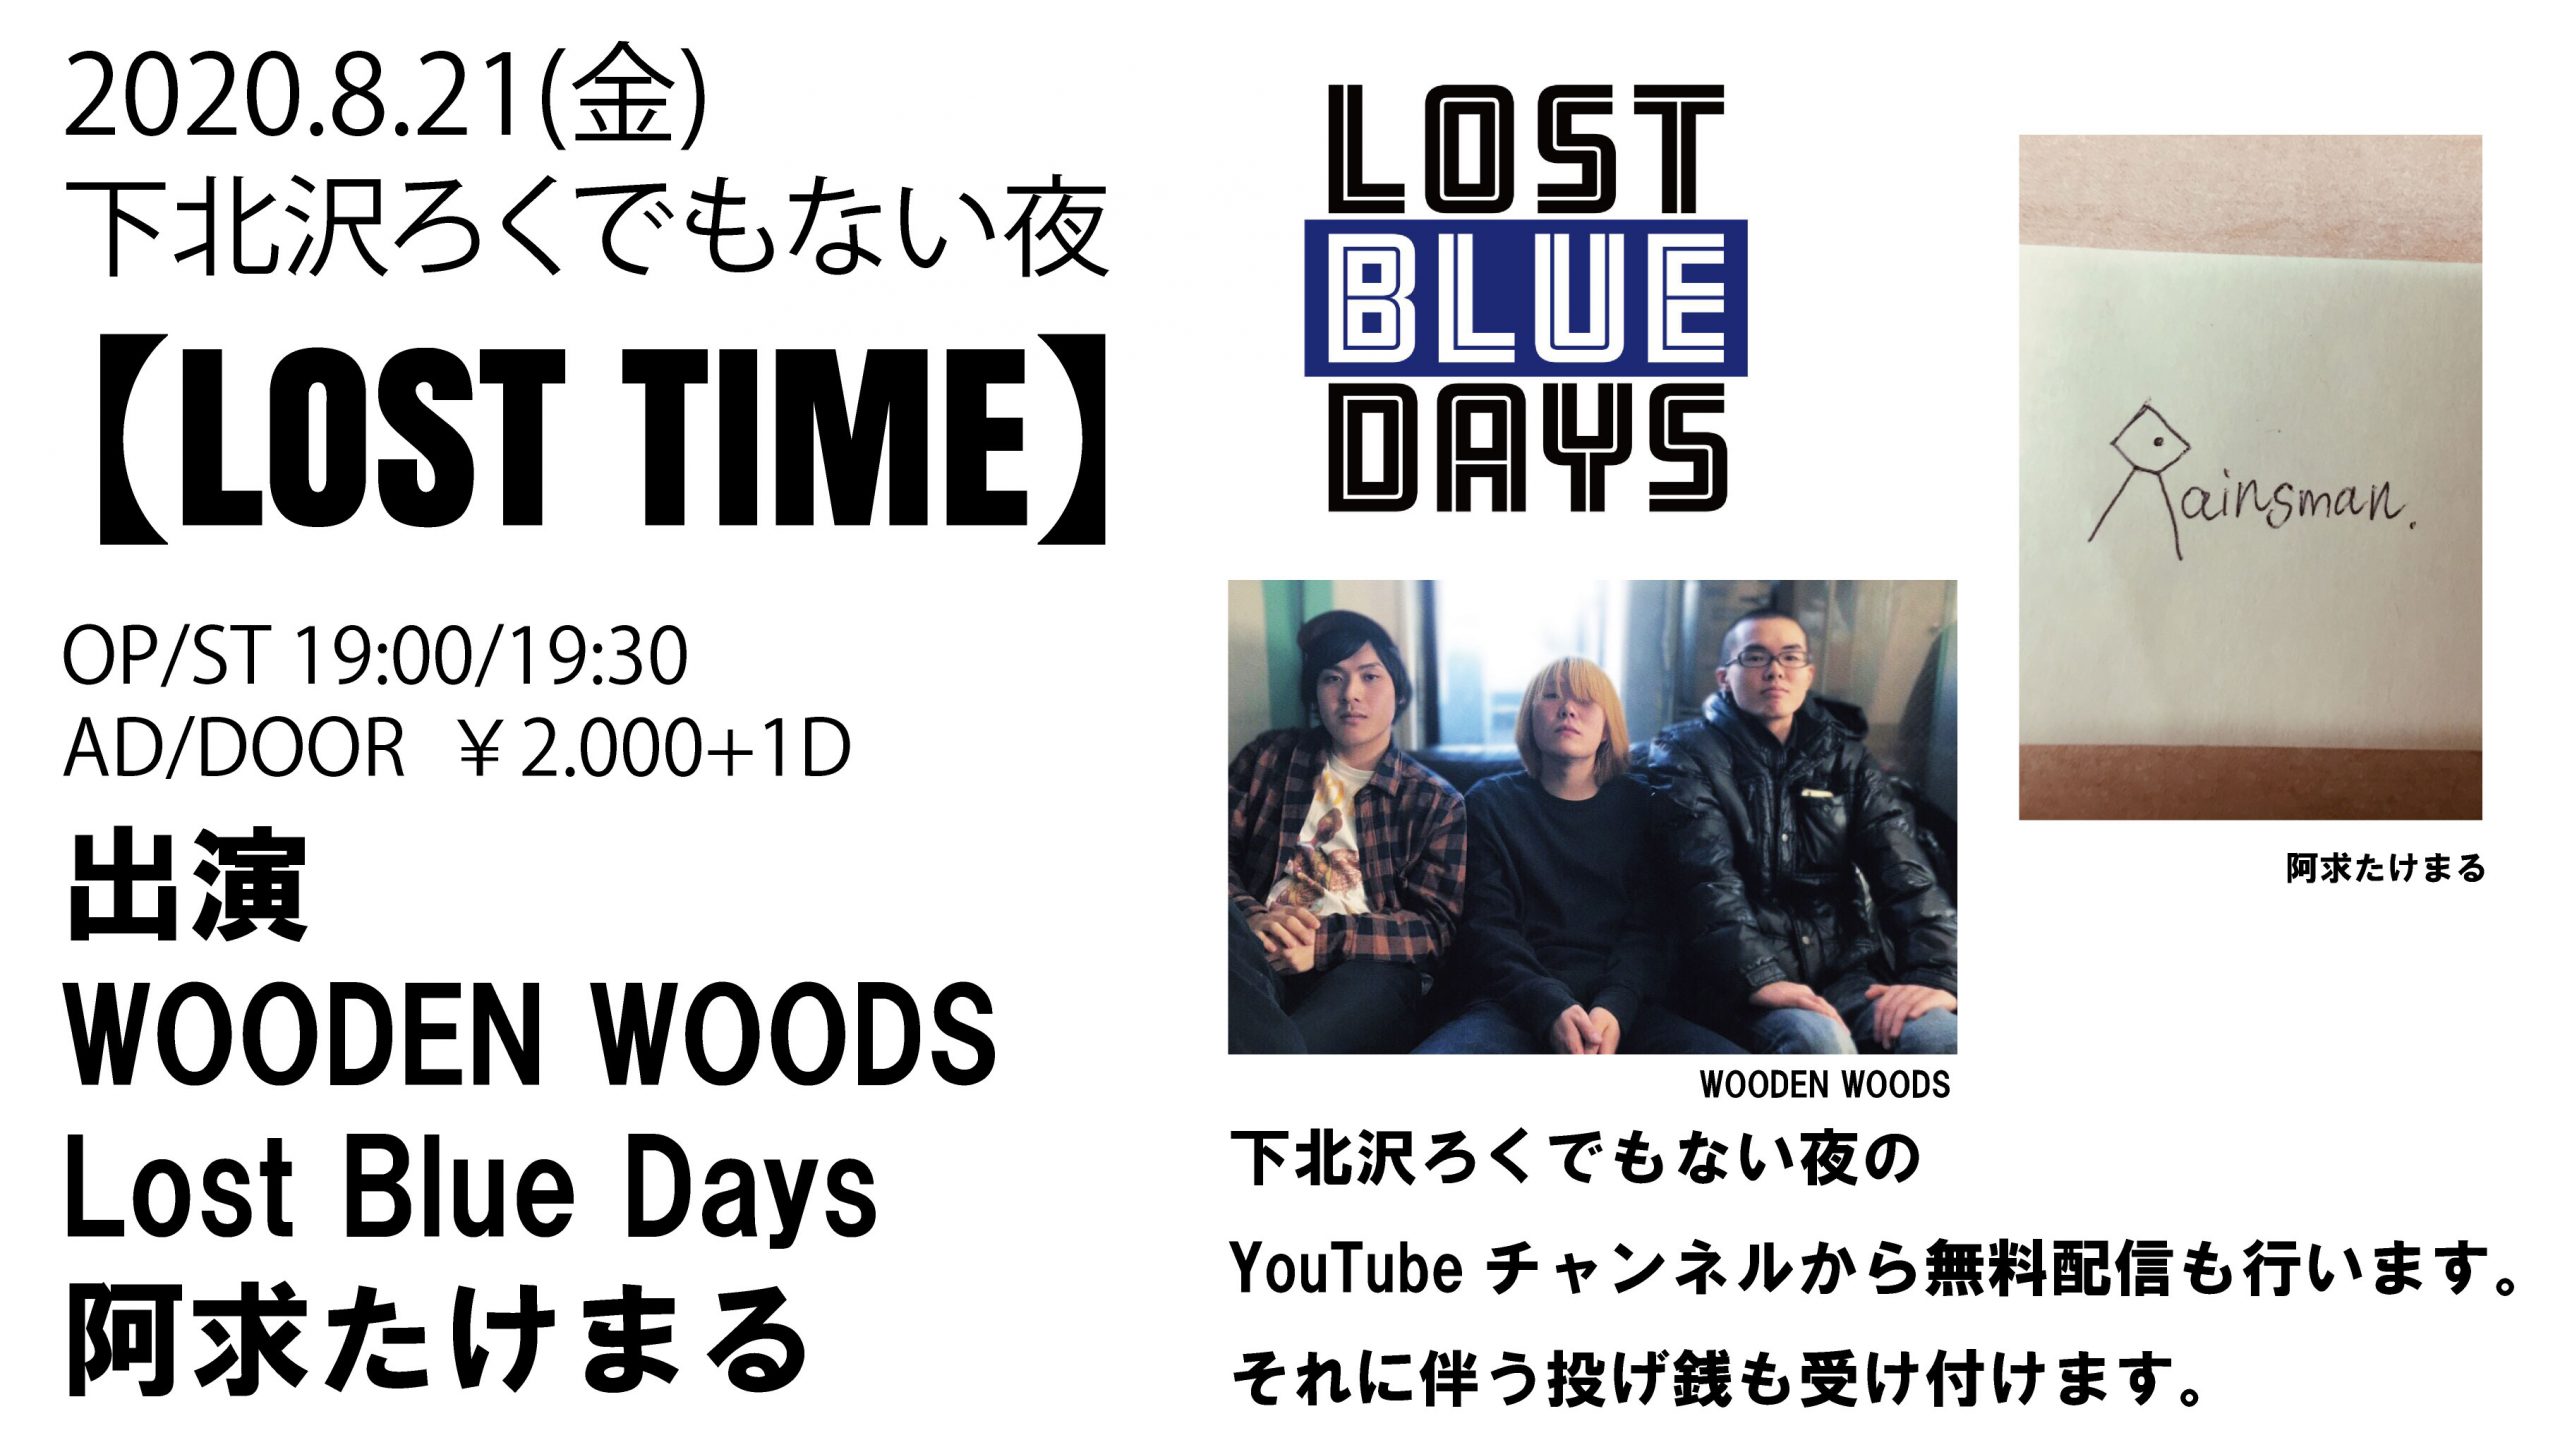 【LOST TIME】